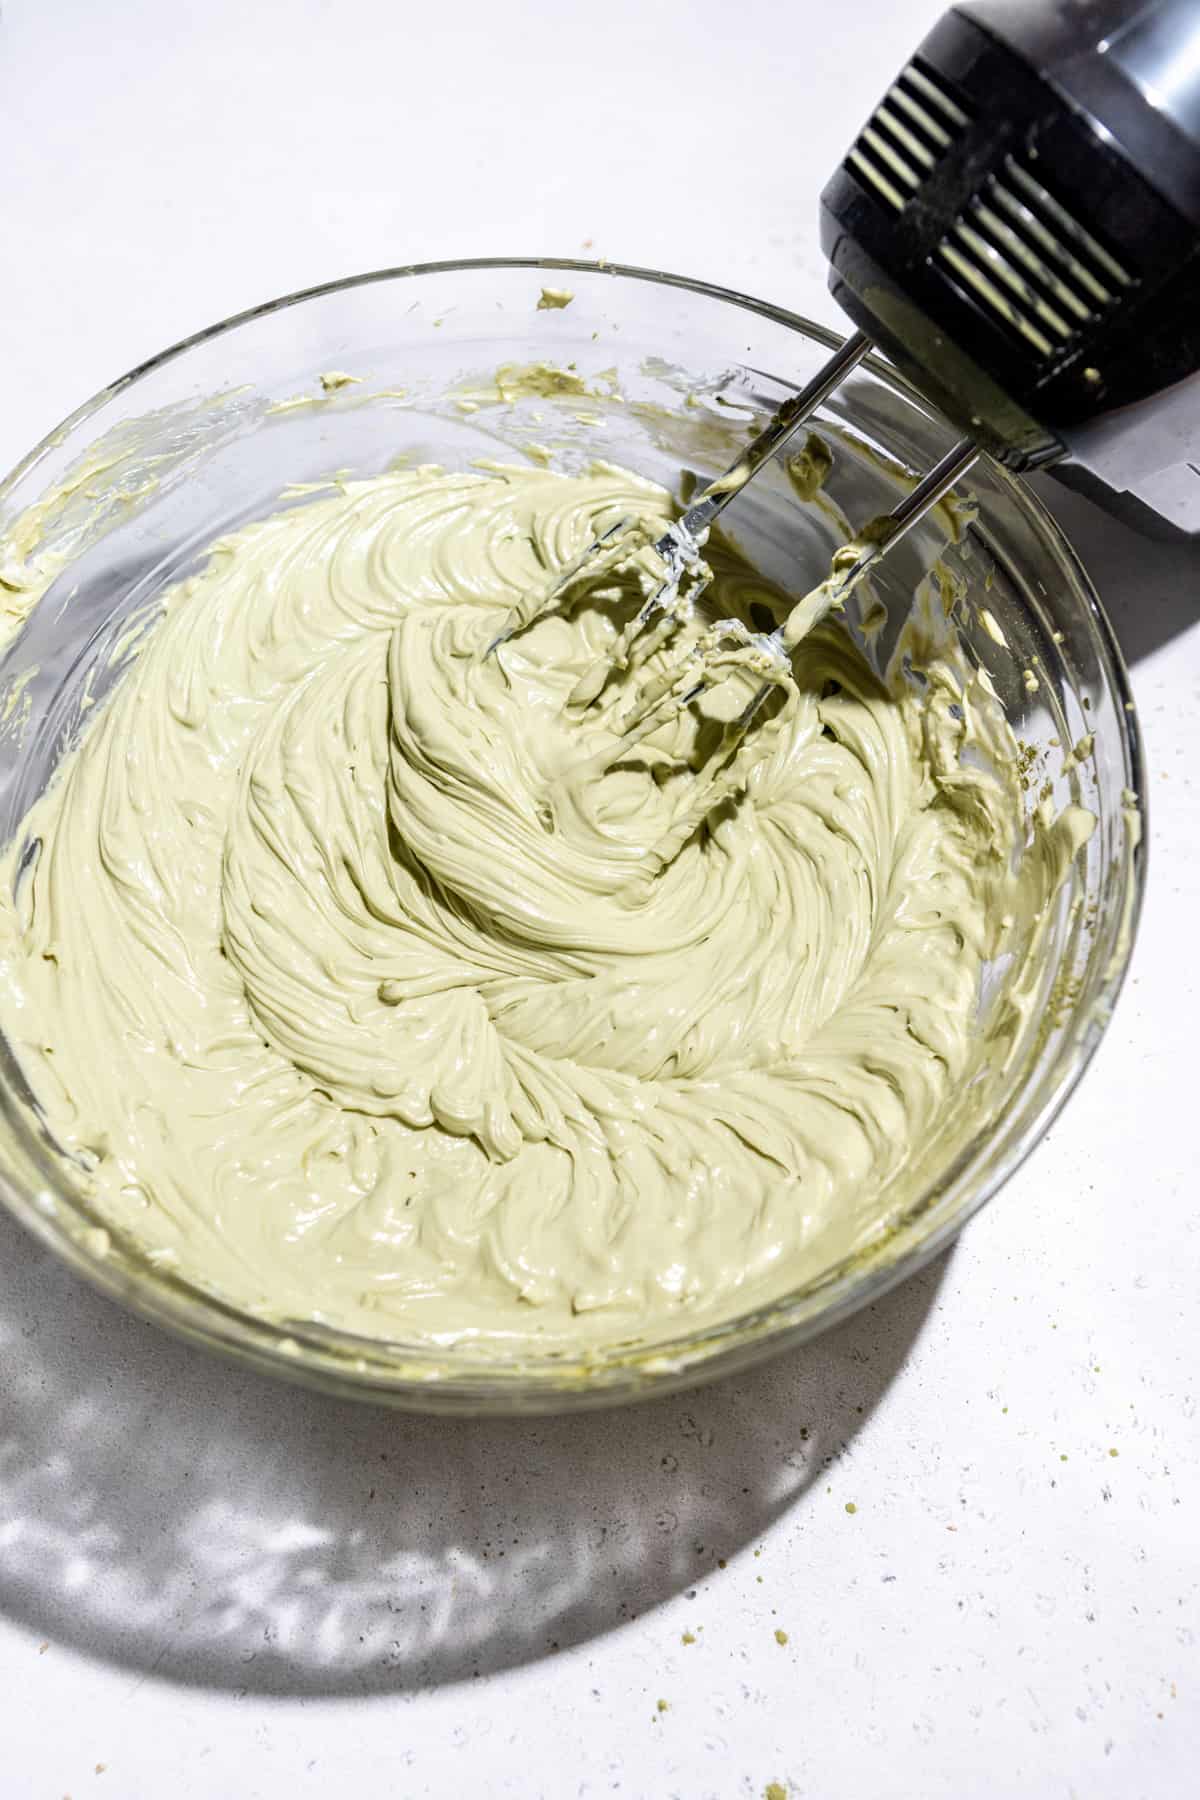 Matcha cheesecake filling being mixed together by a hand mixer in a glass bowl.